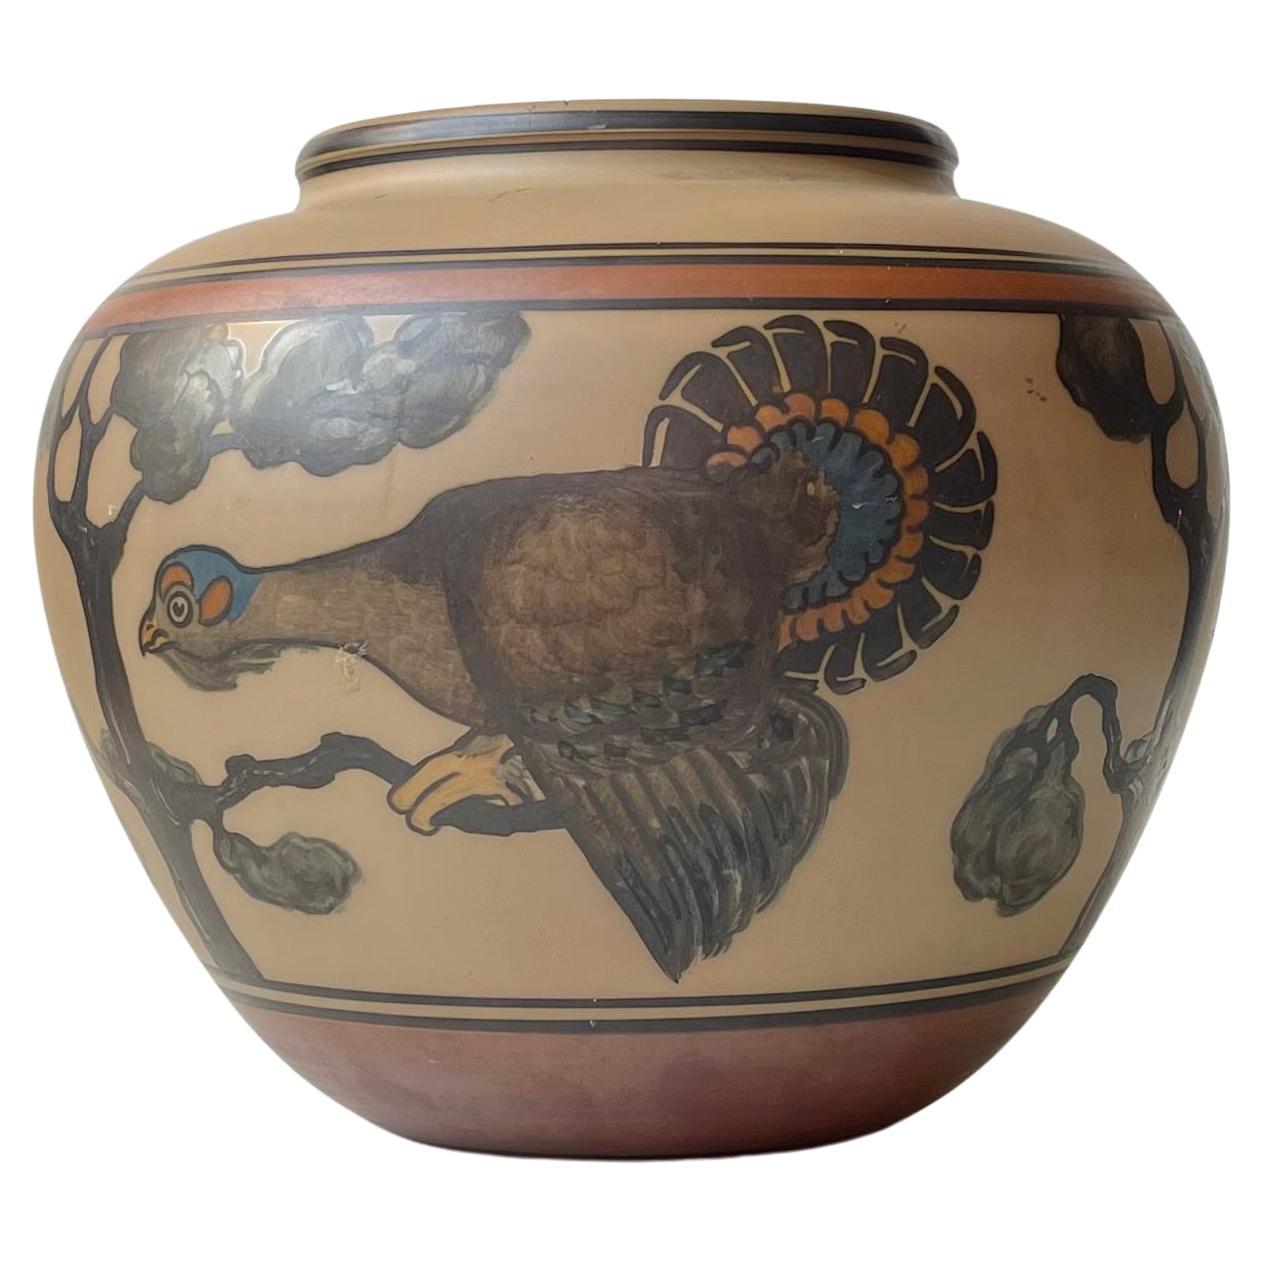 L. Hjorth Hand-Painted Terracotta Planter with Peacock, 1940s For Sale